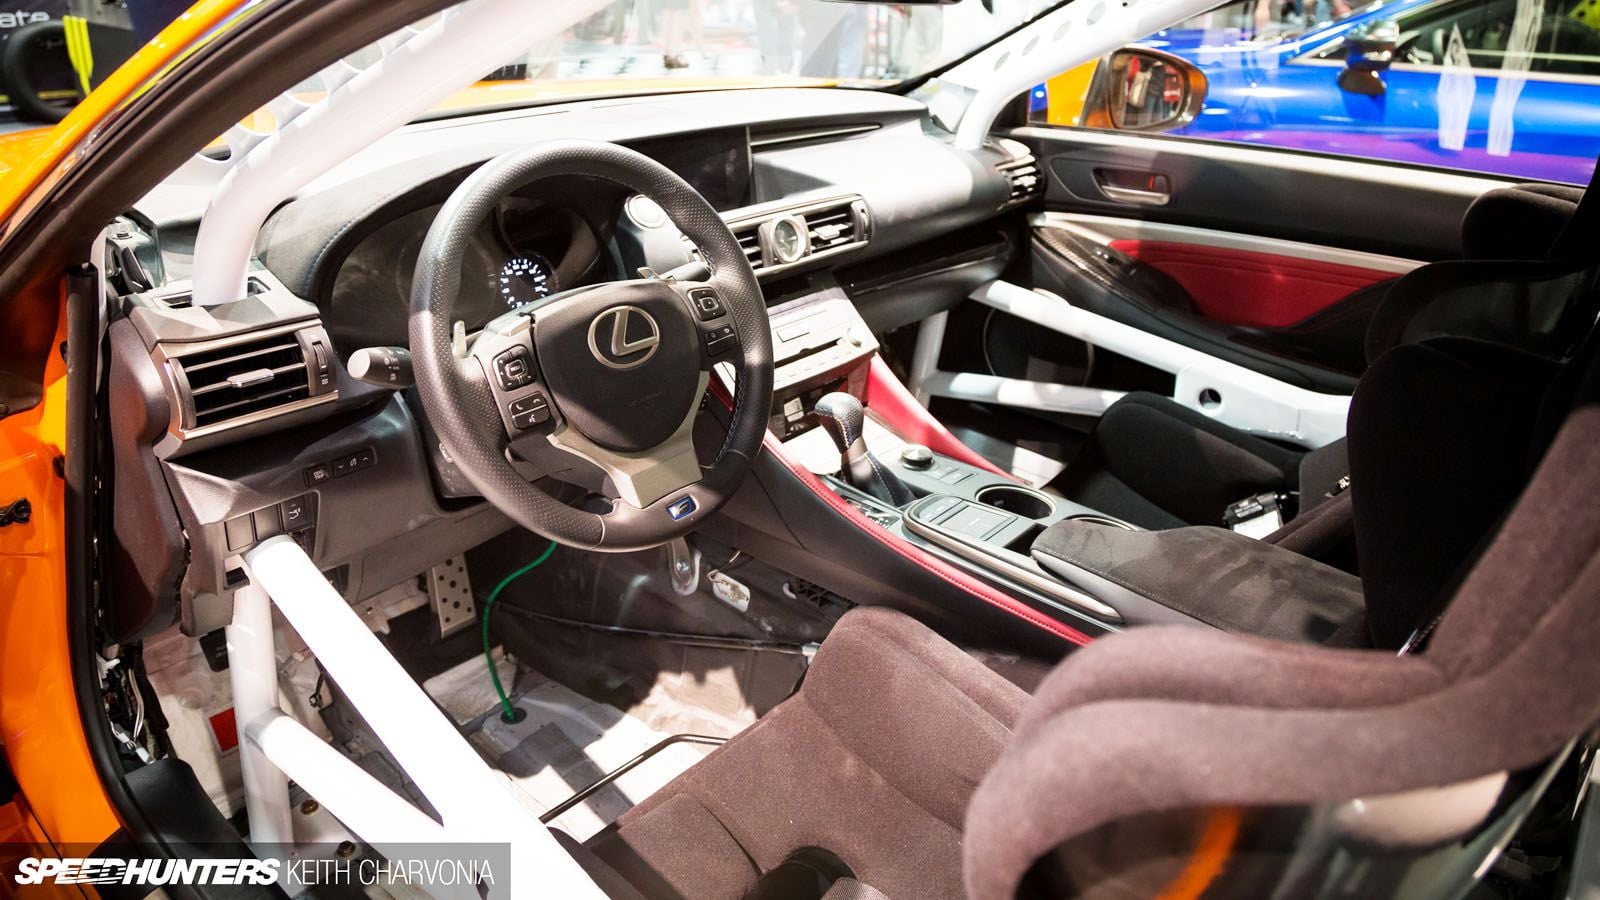 Daily Slideshow: This Lexus RC F is Ready for a Race